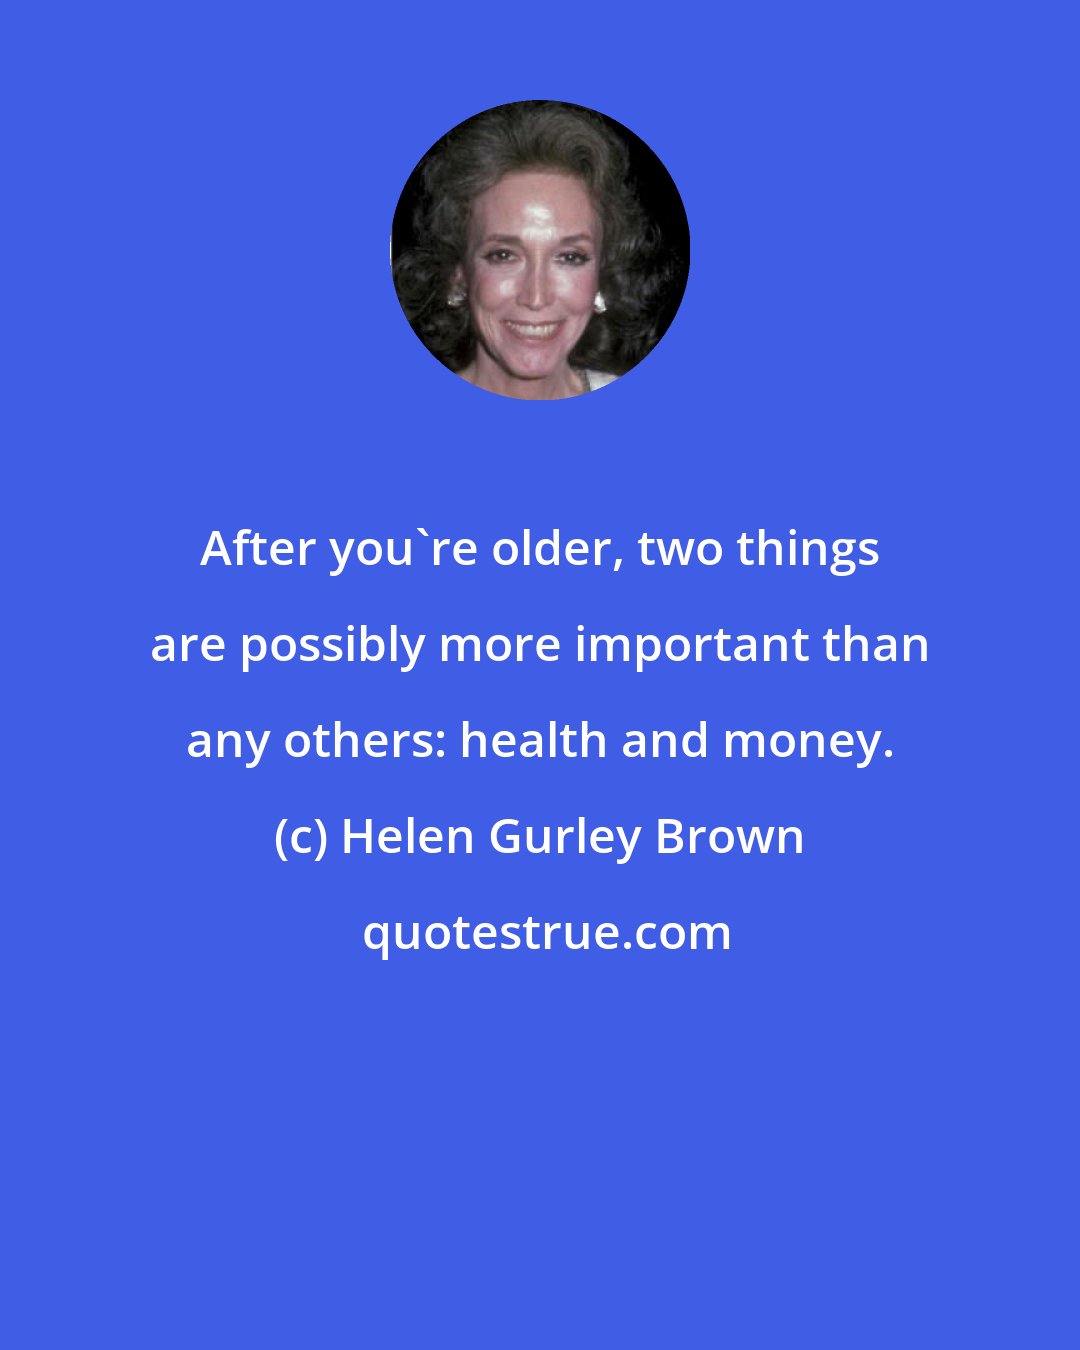 Helen Gurley Brown: After you're older, two things are possibly more important than any others: health and money.